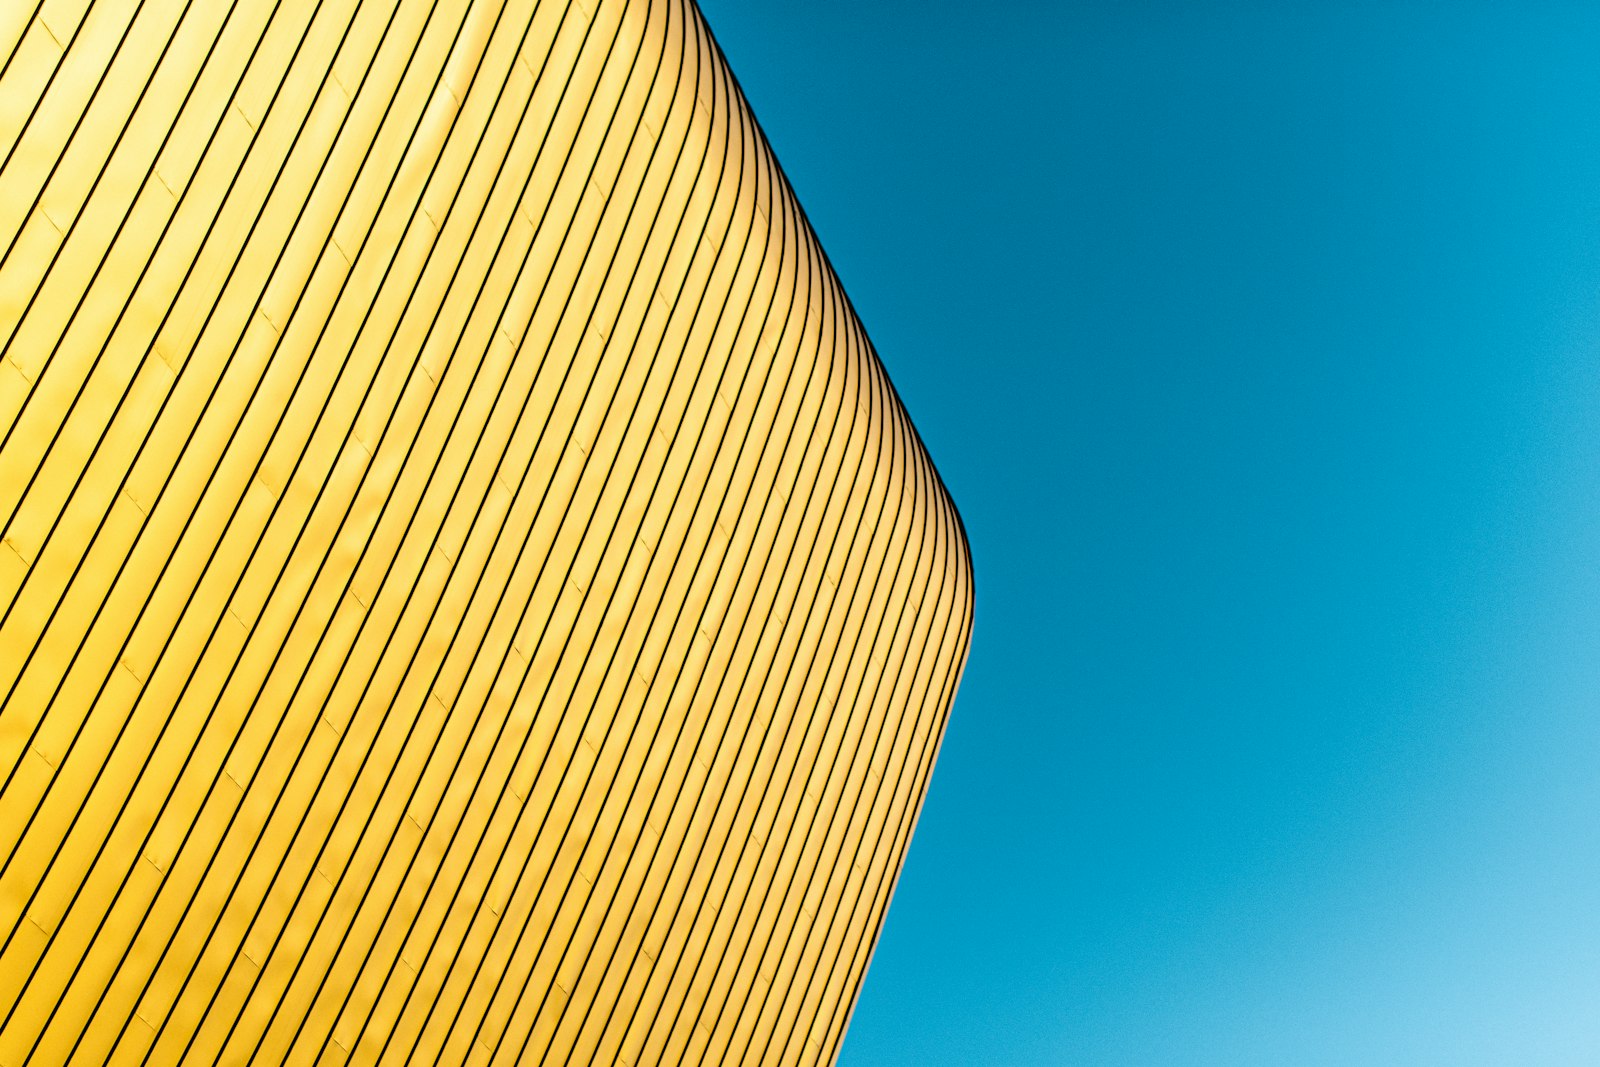 Nikon D7500 + Nikon AF-S Nikkor 50mm F1.4G sample photo. Yellow and blue striped photography